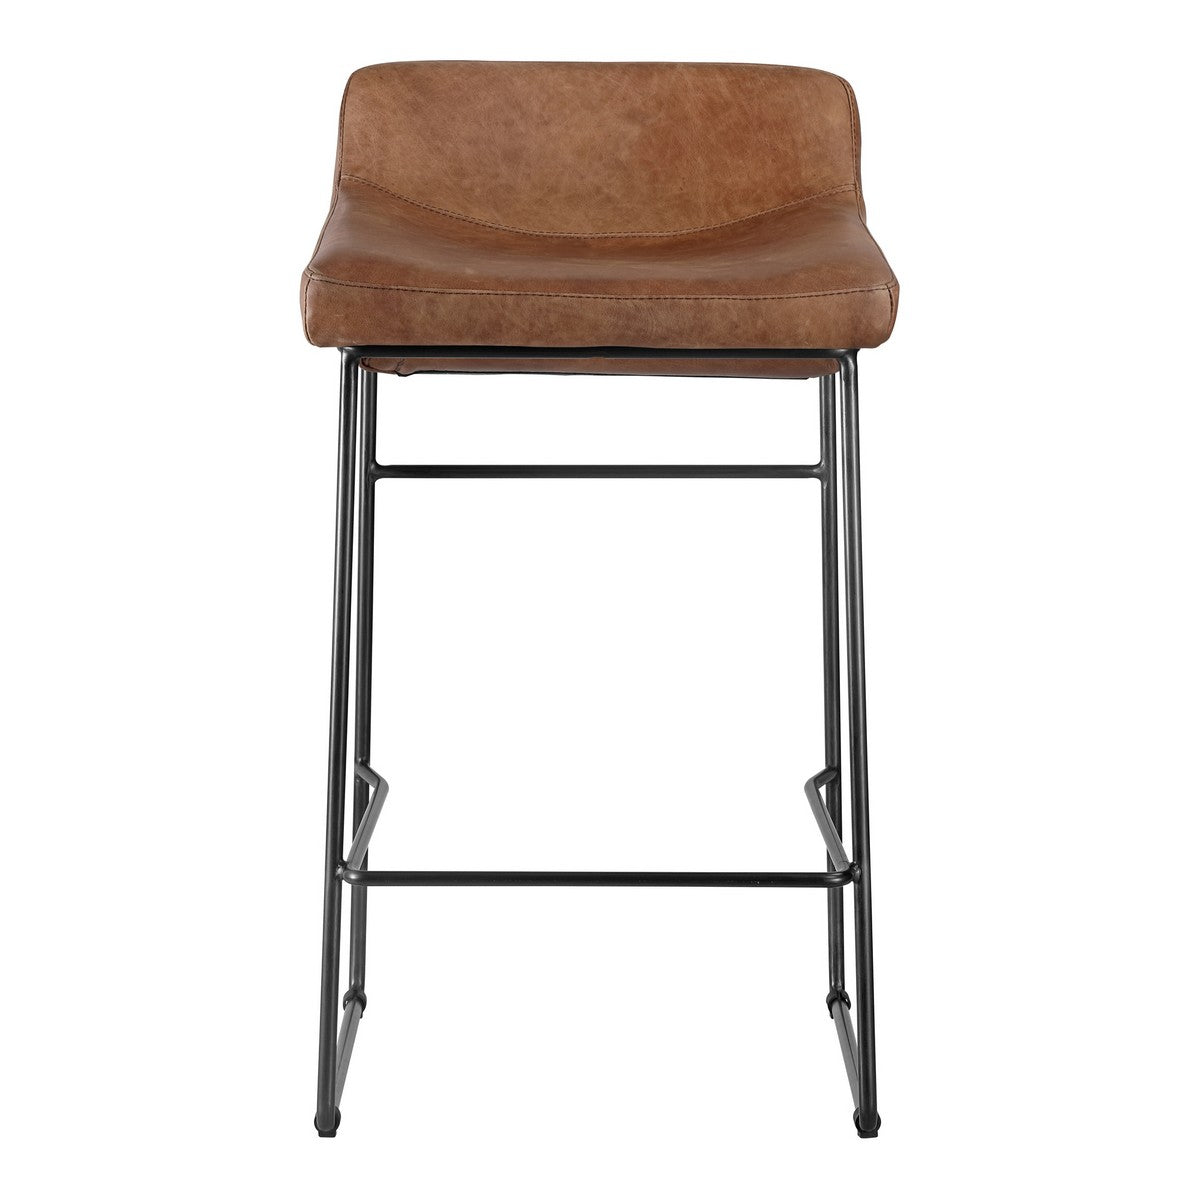 Moe's Home Collection Starlet Counter Stool Cappuccino-Set of Two - PK-1106-14 - Moe's Home Collection - Counter Stools - Minimal And Modern - 1